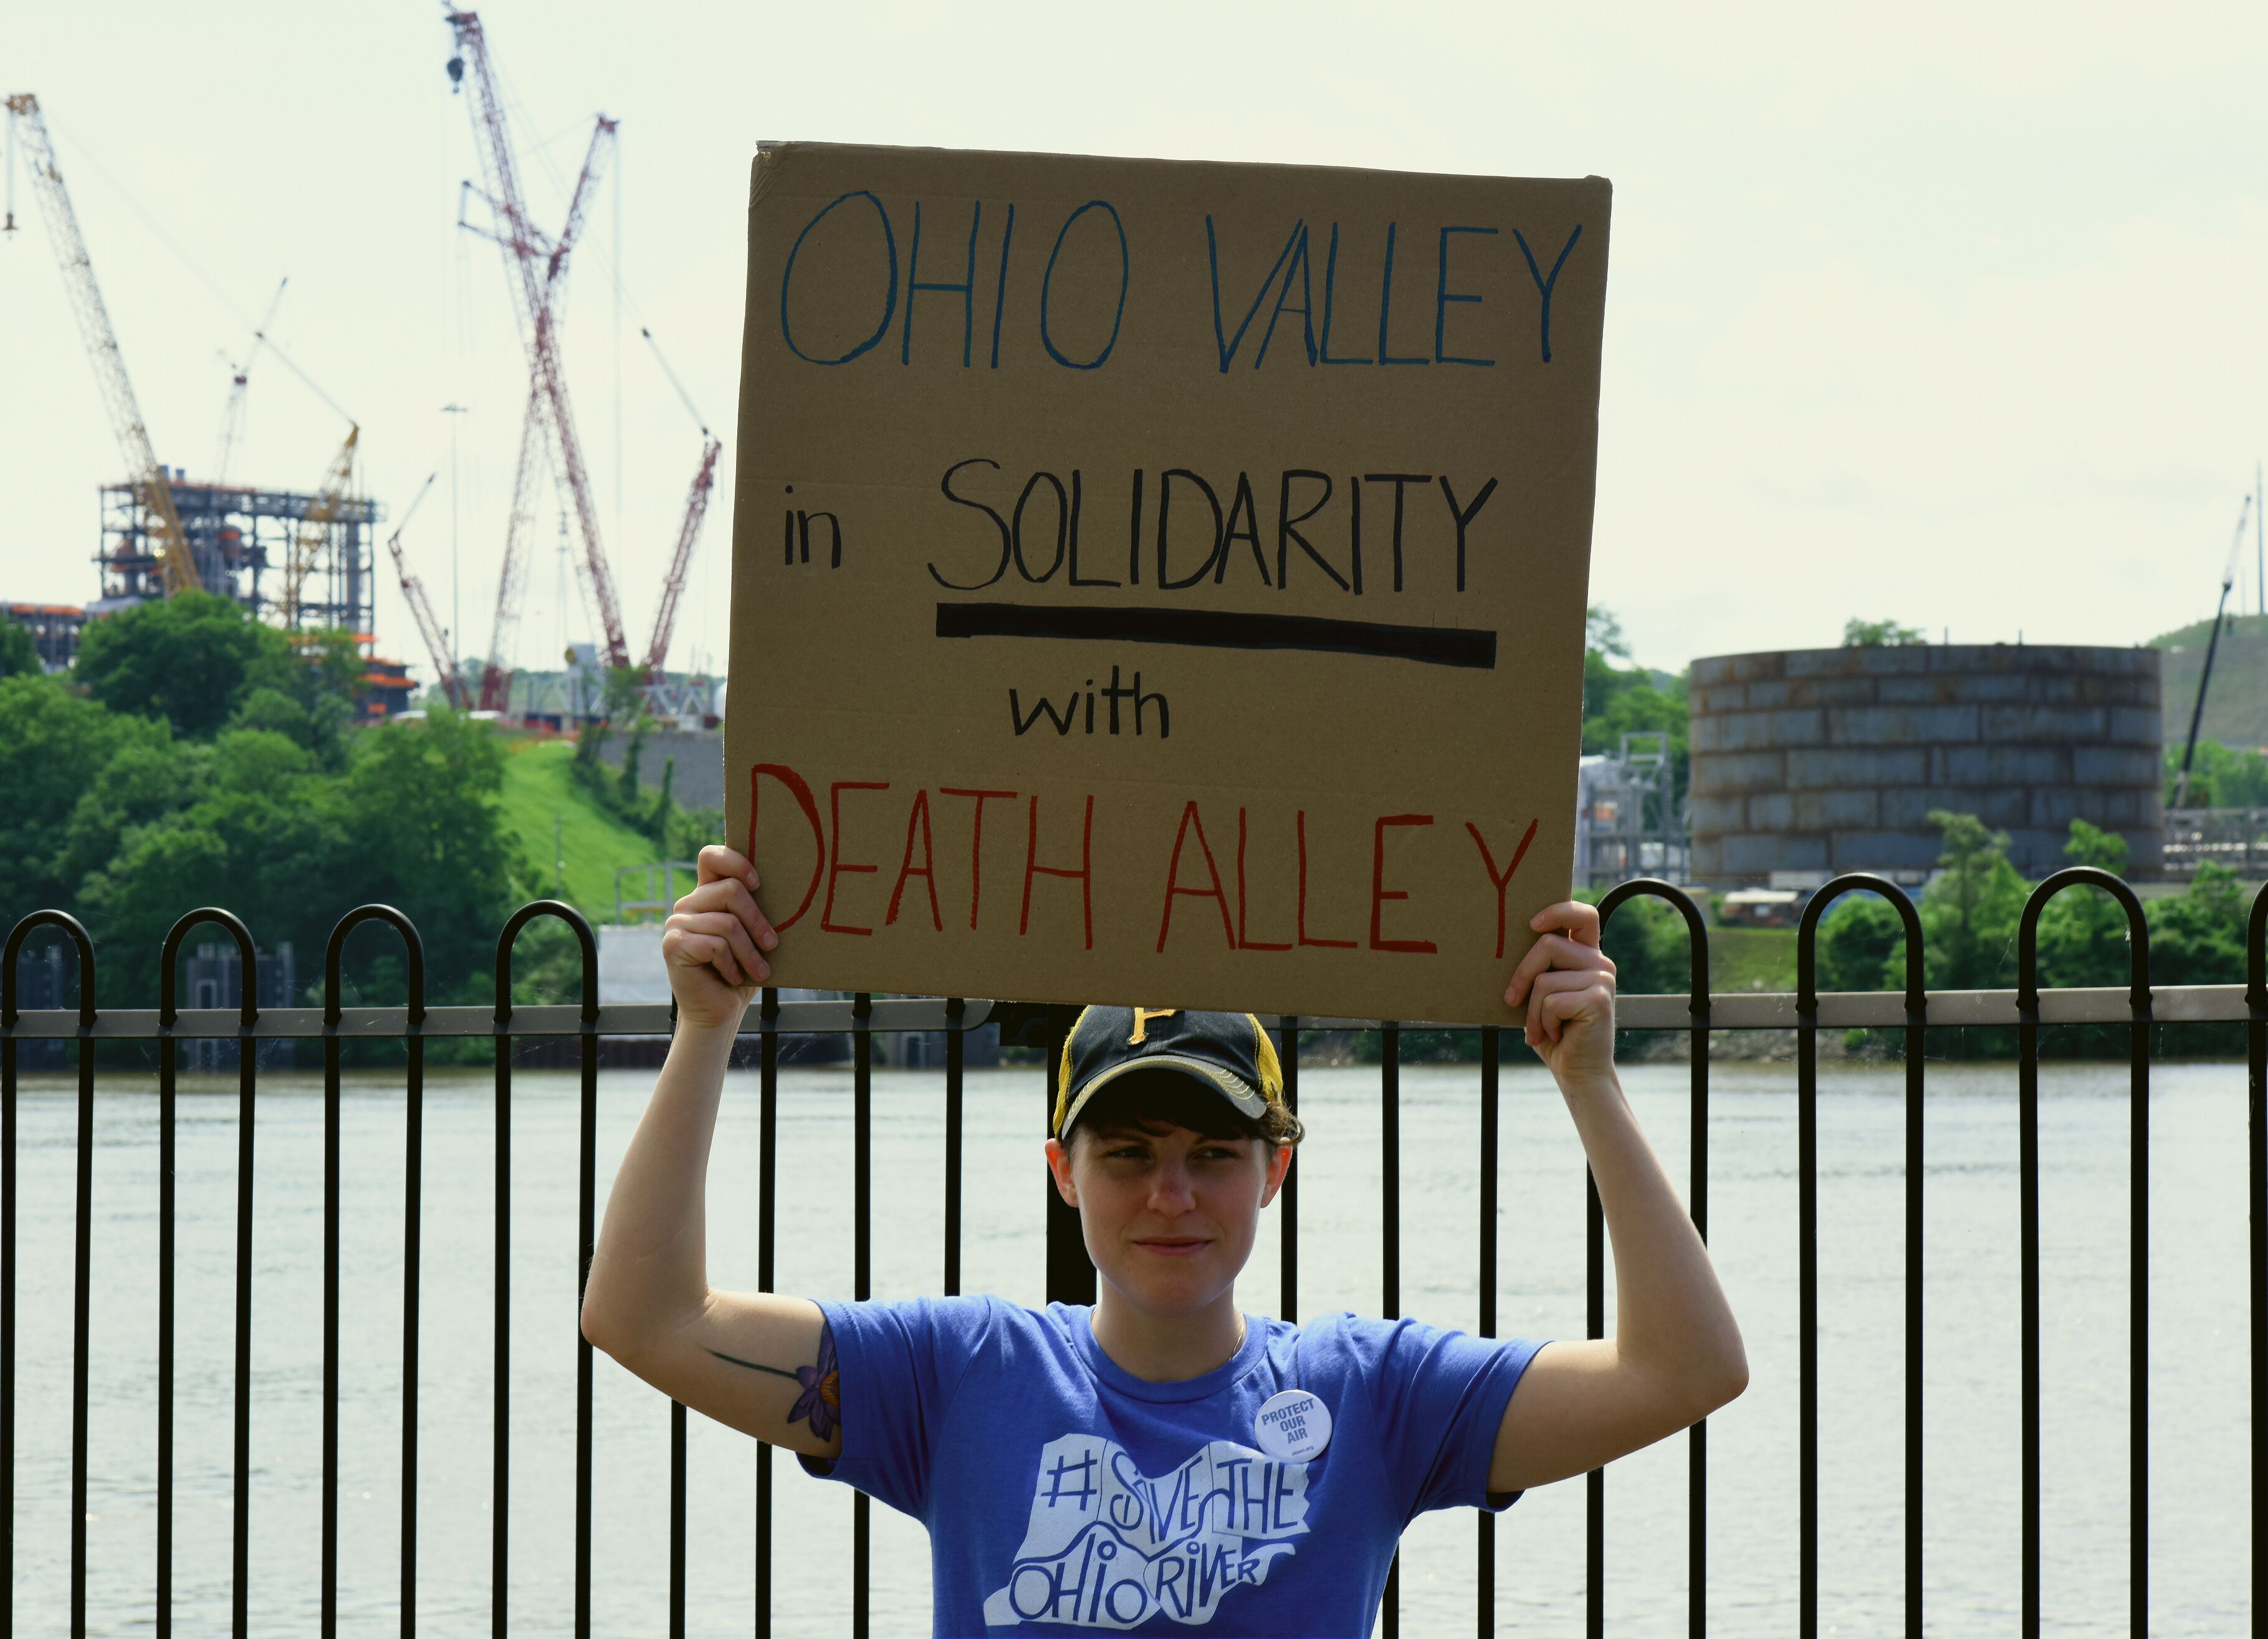 Bev Reed, who lives roughly 13 miles from the site of the proposed PTT cracker, holding a sign saying 'Ohio Vally in solidarity'